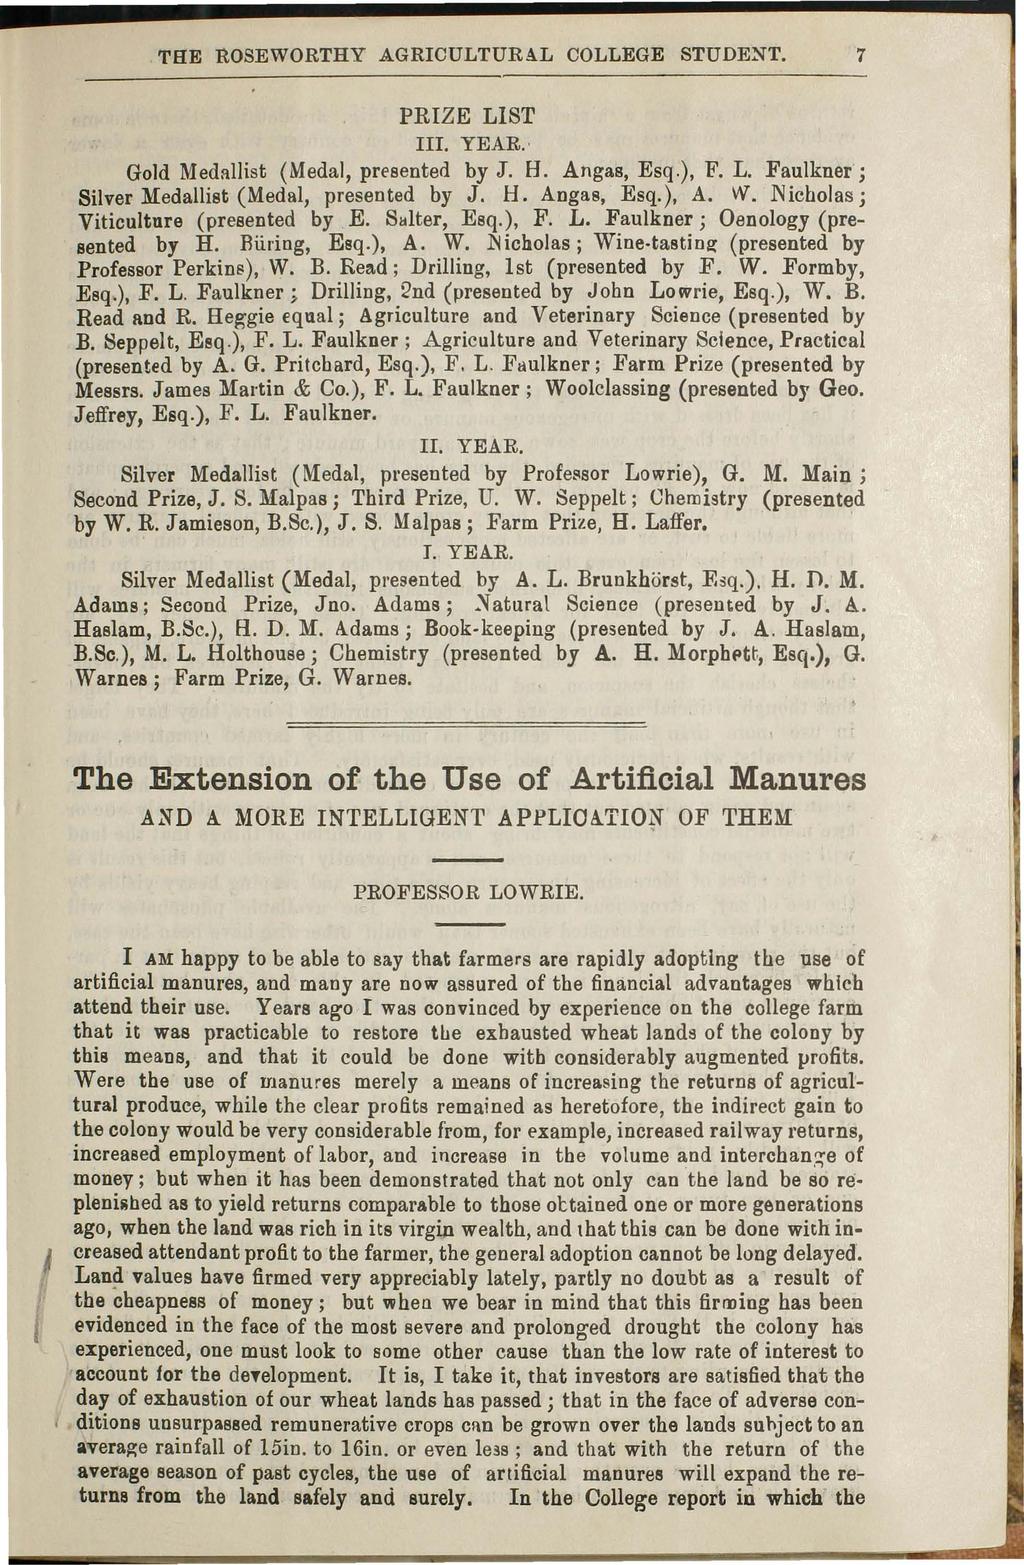 THE ROSE WORTHY AGRICULTURA.L COLLEGE STUDE:NT. 7 PRIZE LIST III. YEAR., Gold Medallist (Medal, presented by J. H. Angas, Esq,), F. L. Faulkner'; Silver Medallist (Medal, presented by J. H. A.ngas, Esq.), A.